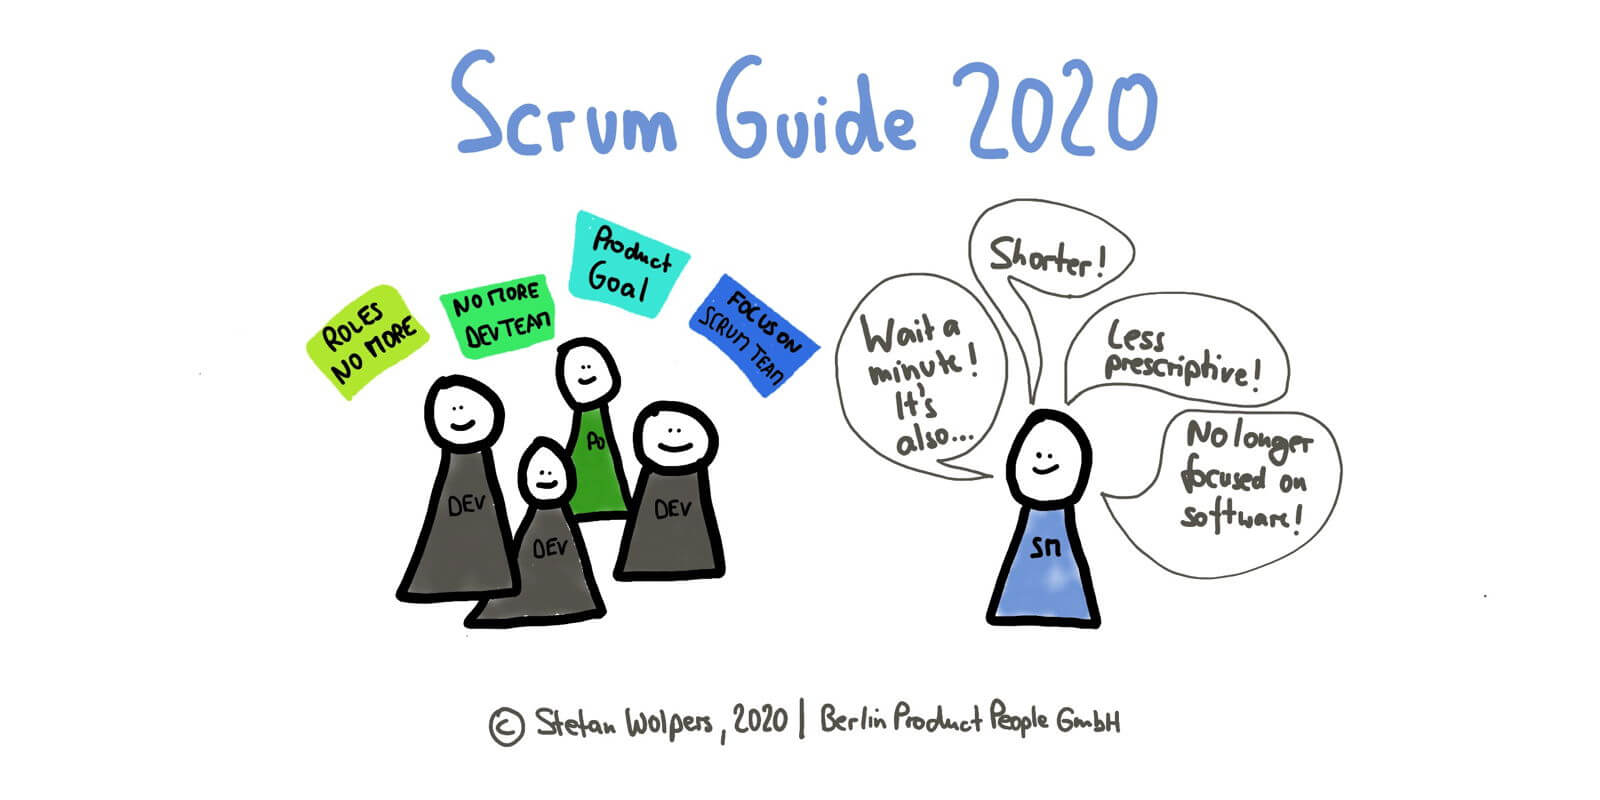 Scrum Guide 2020 — The Development Team Is Dead; Long Live the Scrum Team! Berlin Product People GmbH